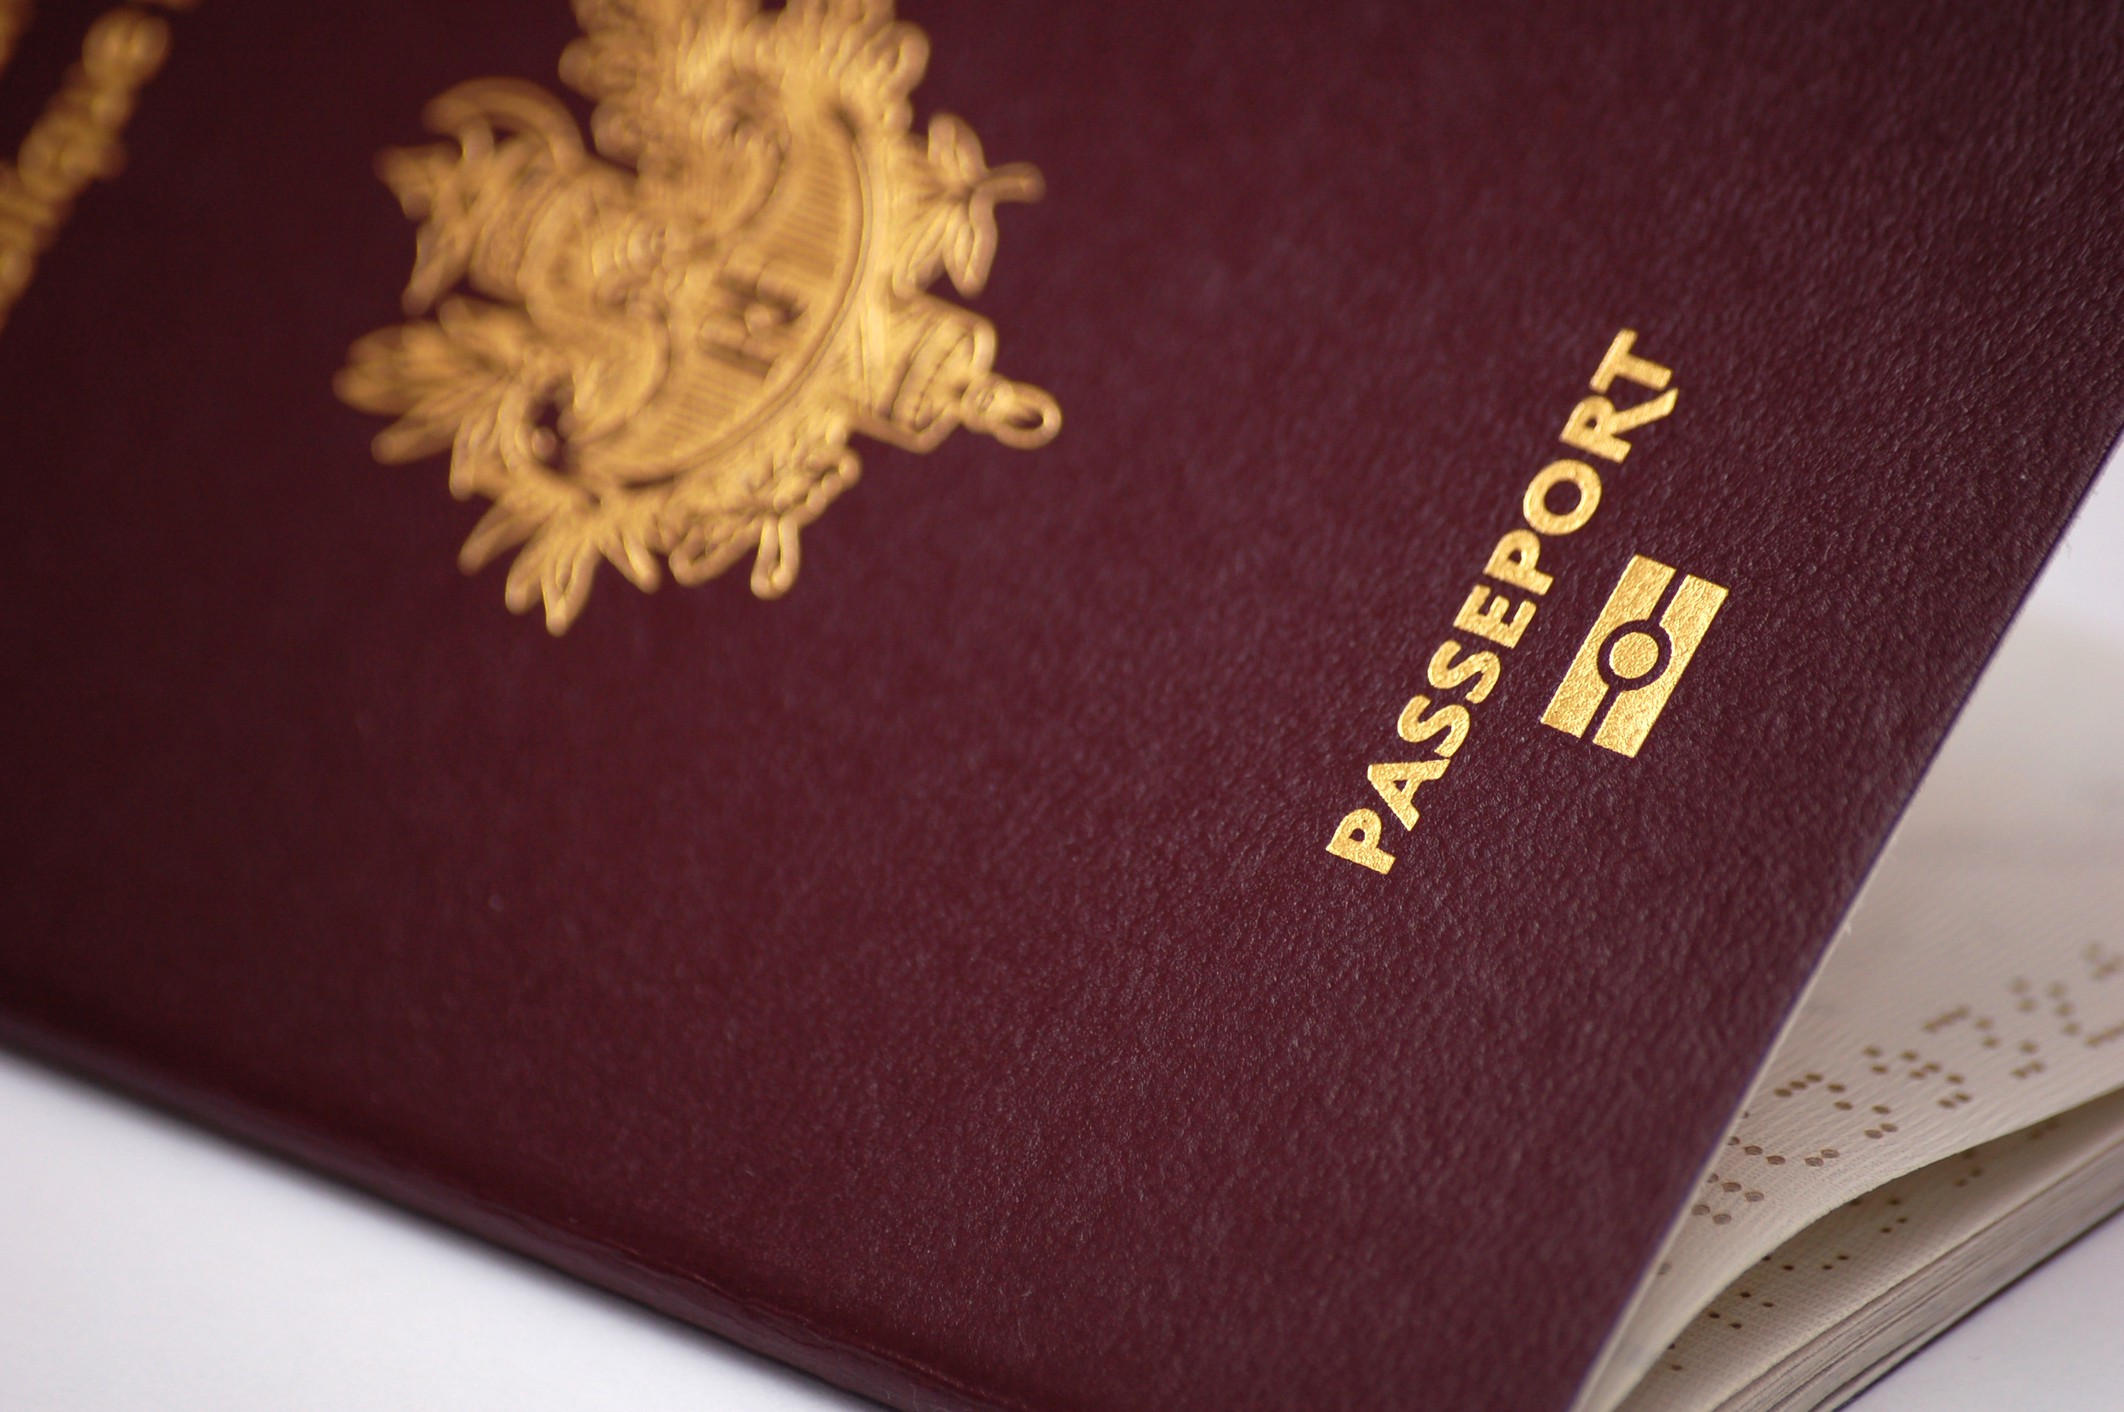 Vietnam issue three-month electronic visas to French citizens From August 2023